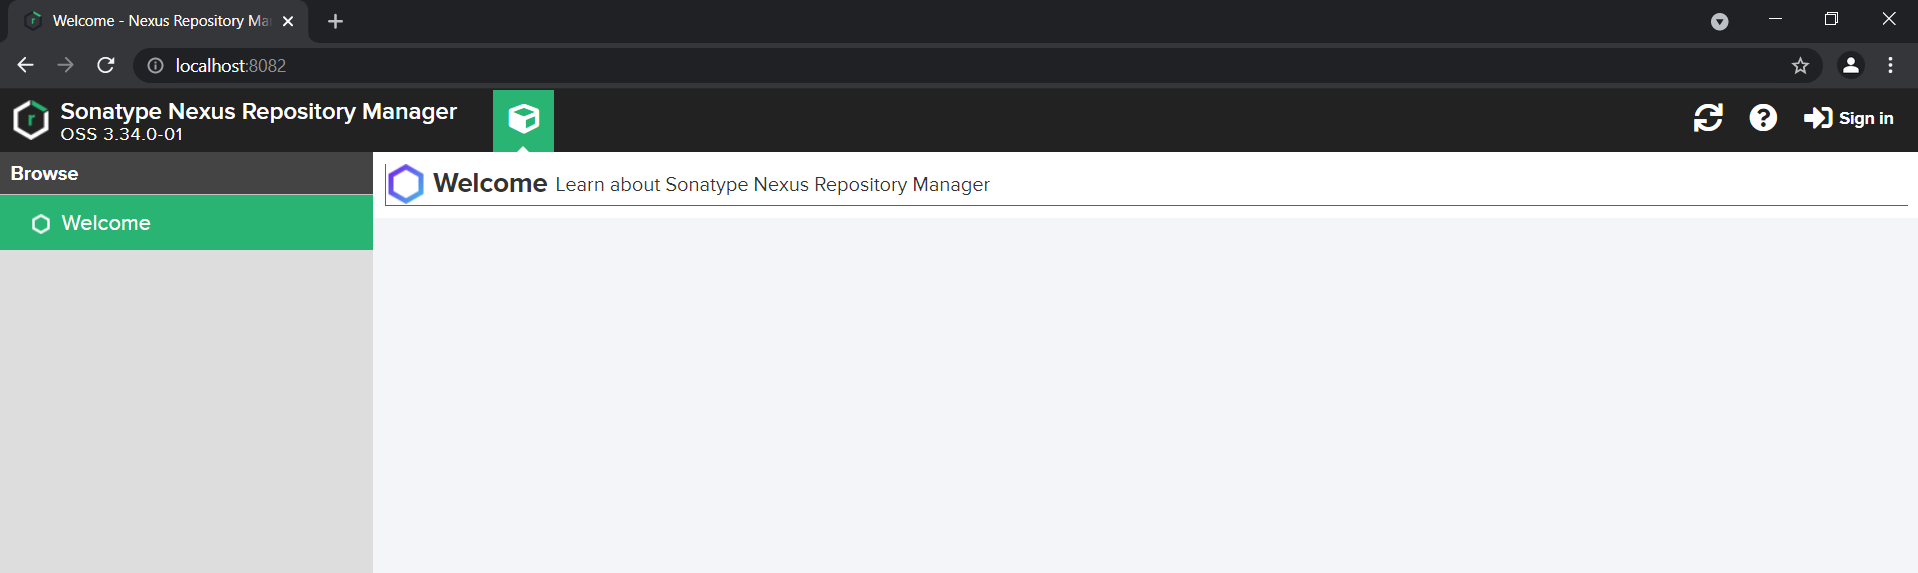 Nexus OSS 3 homepage where Maven Packages will be uploaded